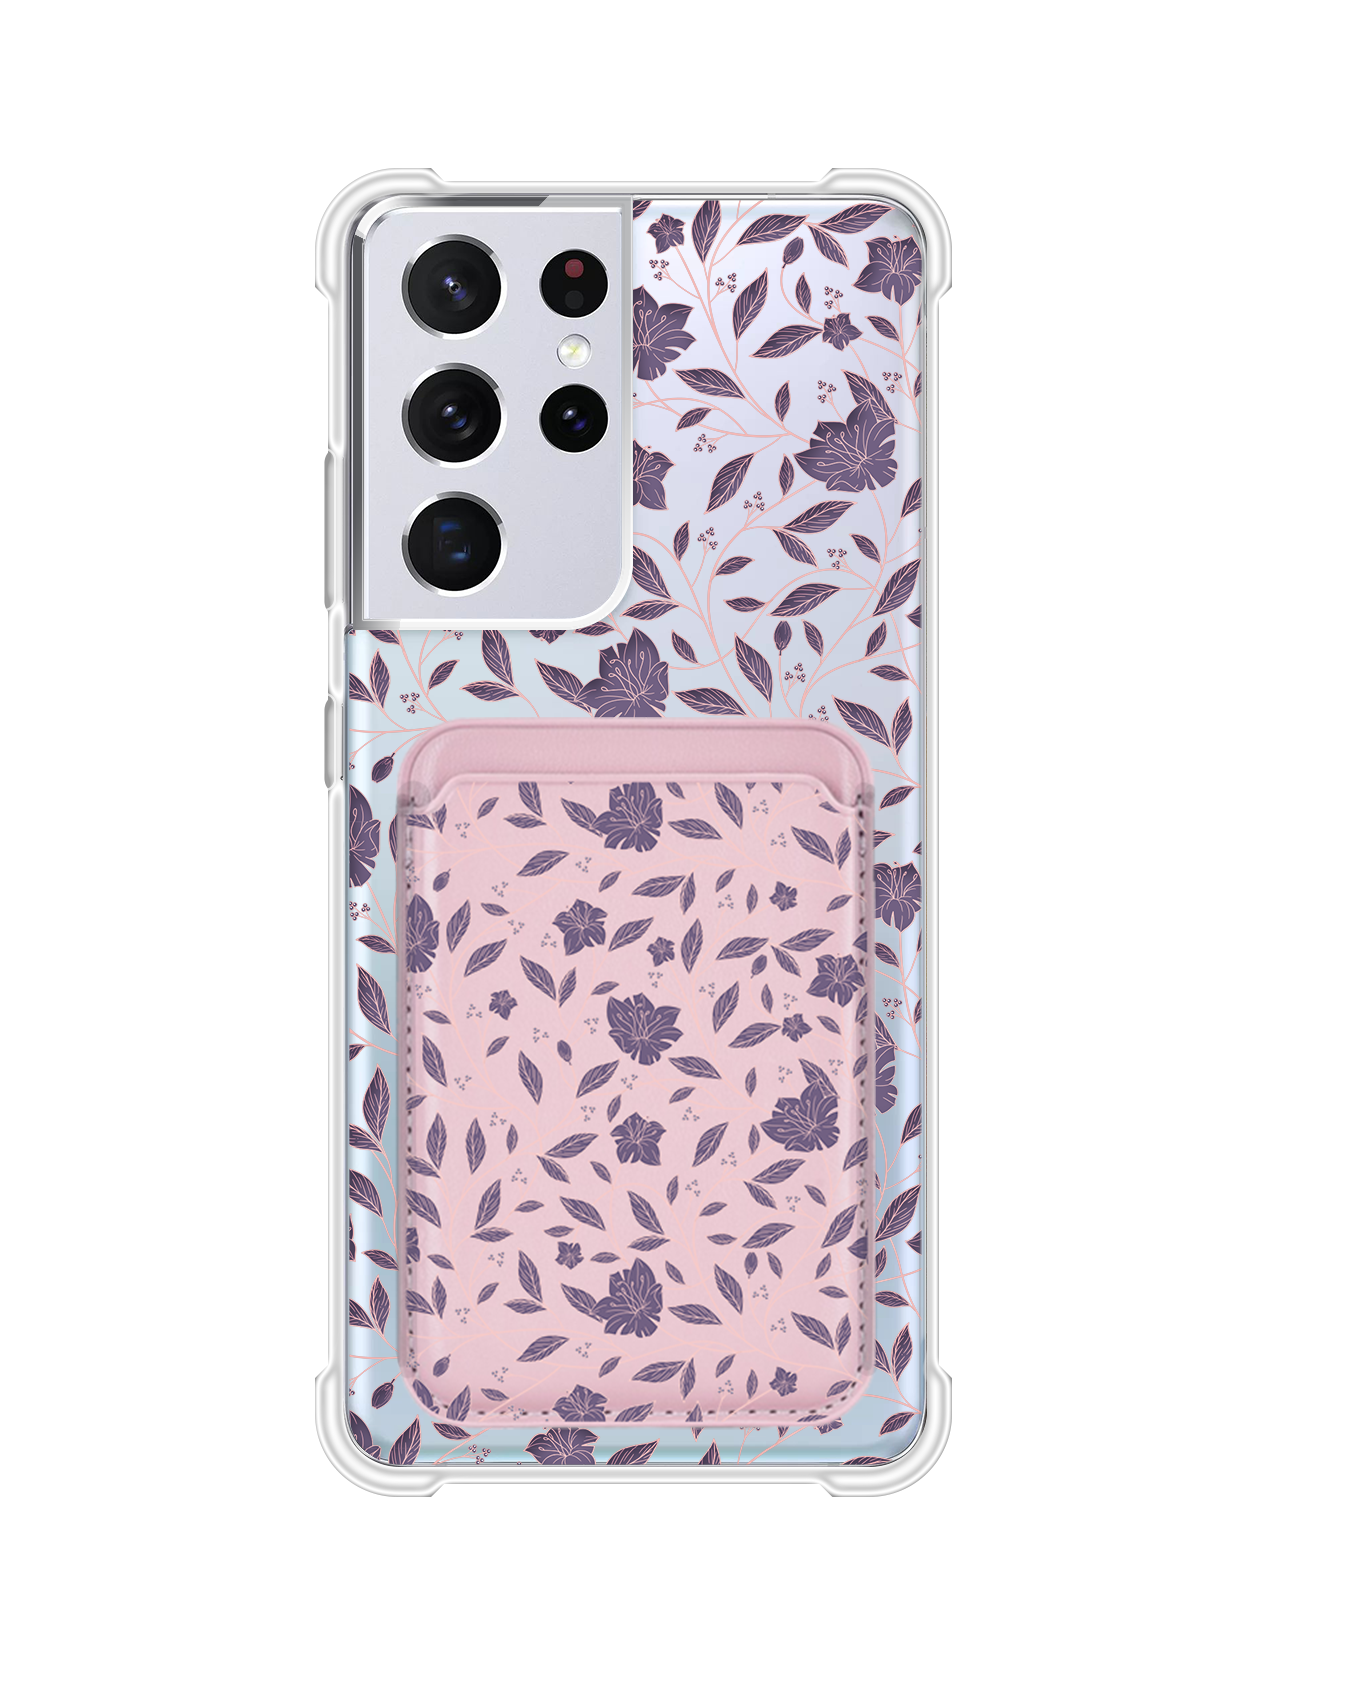 Android Magnetic Wallet Case - Sketchy Flower 4.0